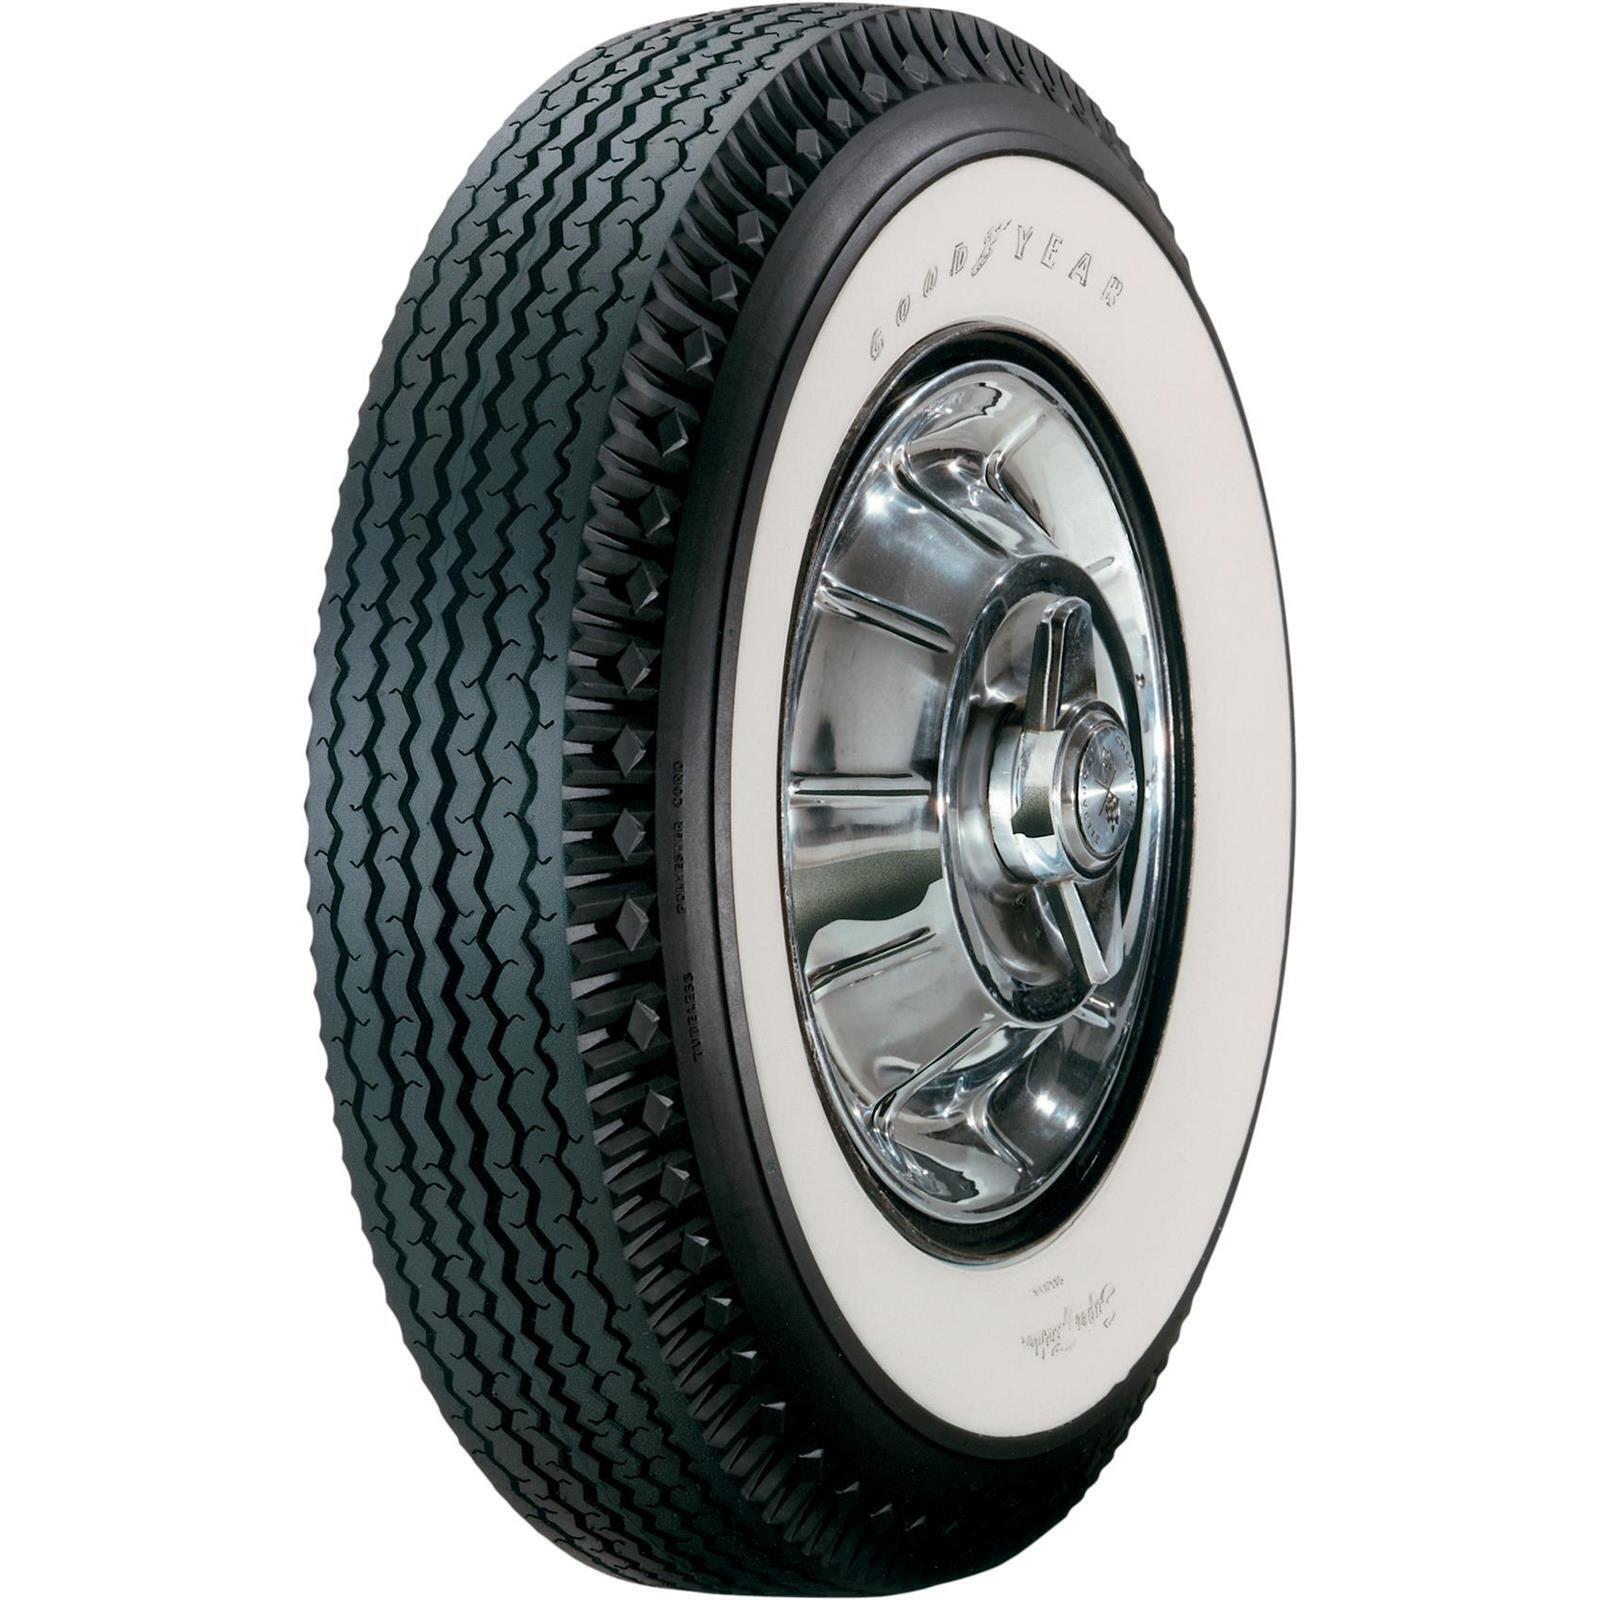 Kelsey Tire CB985 Super Cushion Deluxe Whitewall Tire, 710/15